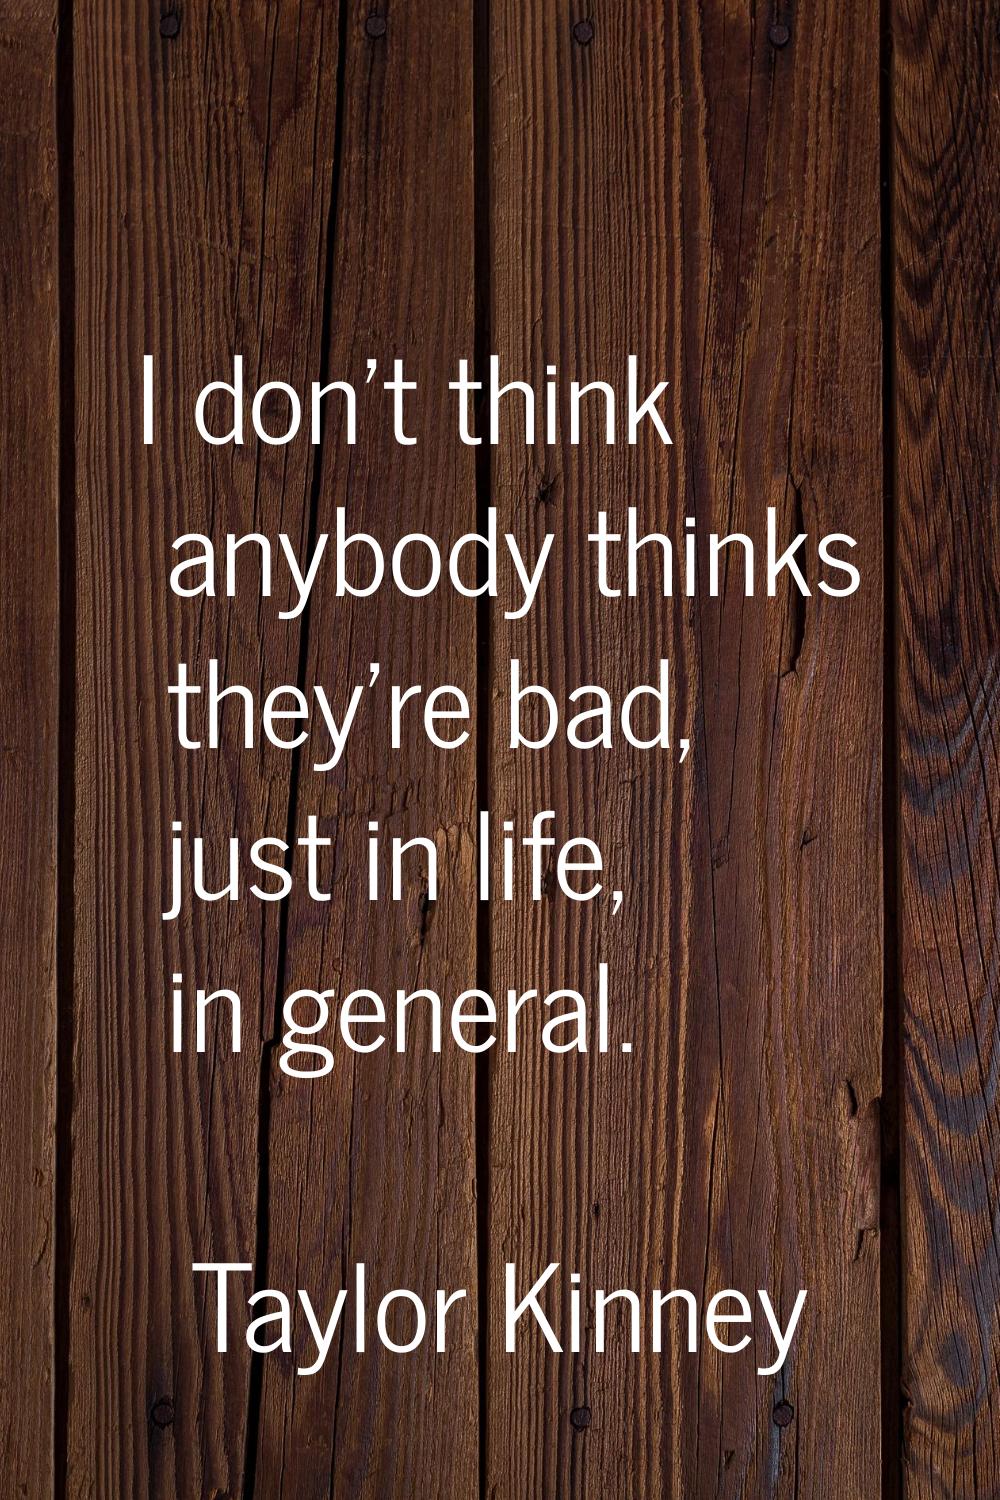 I don't think anybody thinks they're bad, just in life, in general.